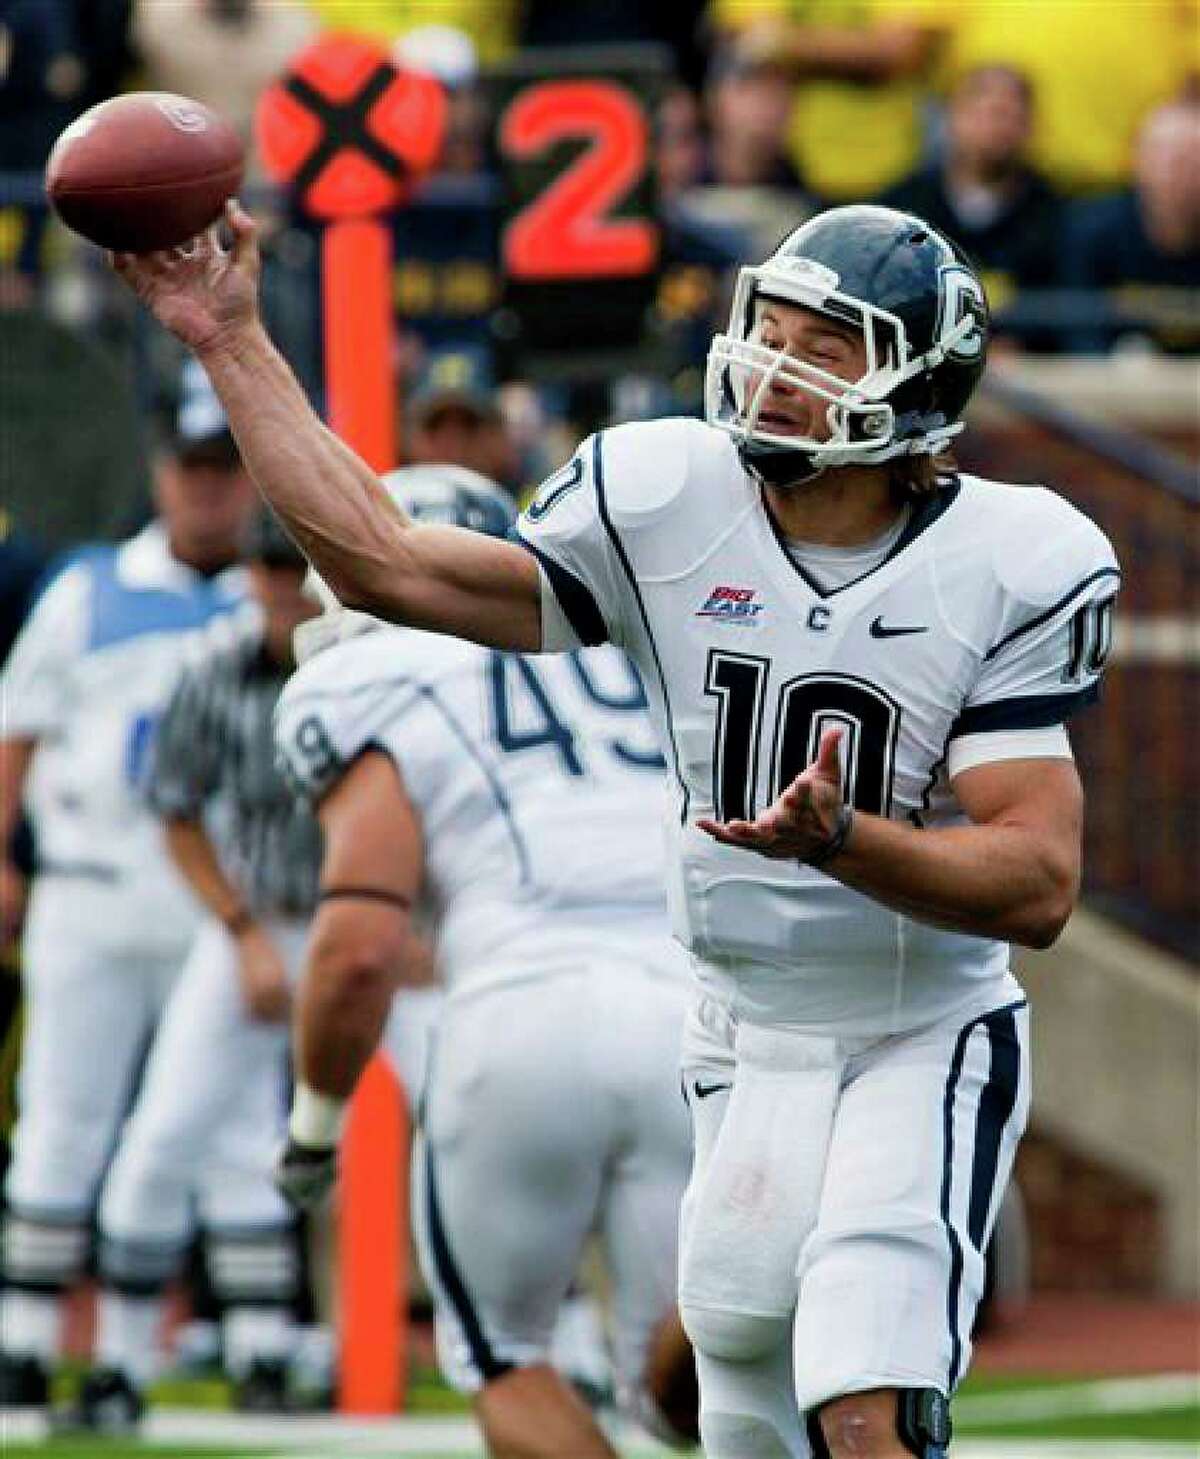 Connecticut quarterback Zach Frazer throws a pass in the second quarter of an NCAA college football game against Michigan, Saturday, Sept. 4, 2010, in Ann Arbor, Mich. (AP Photo/Tony Ding)